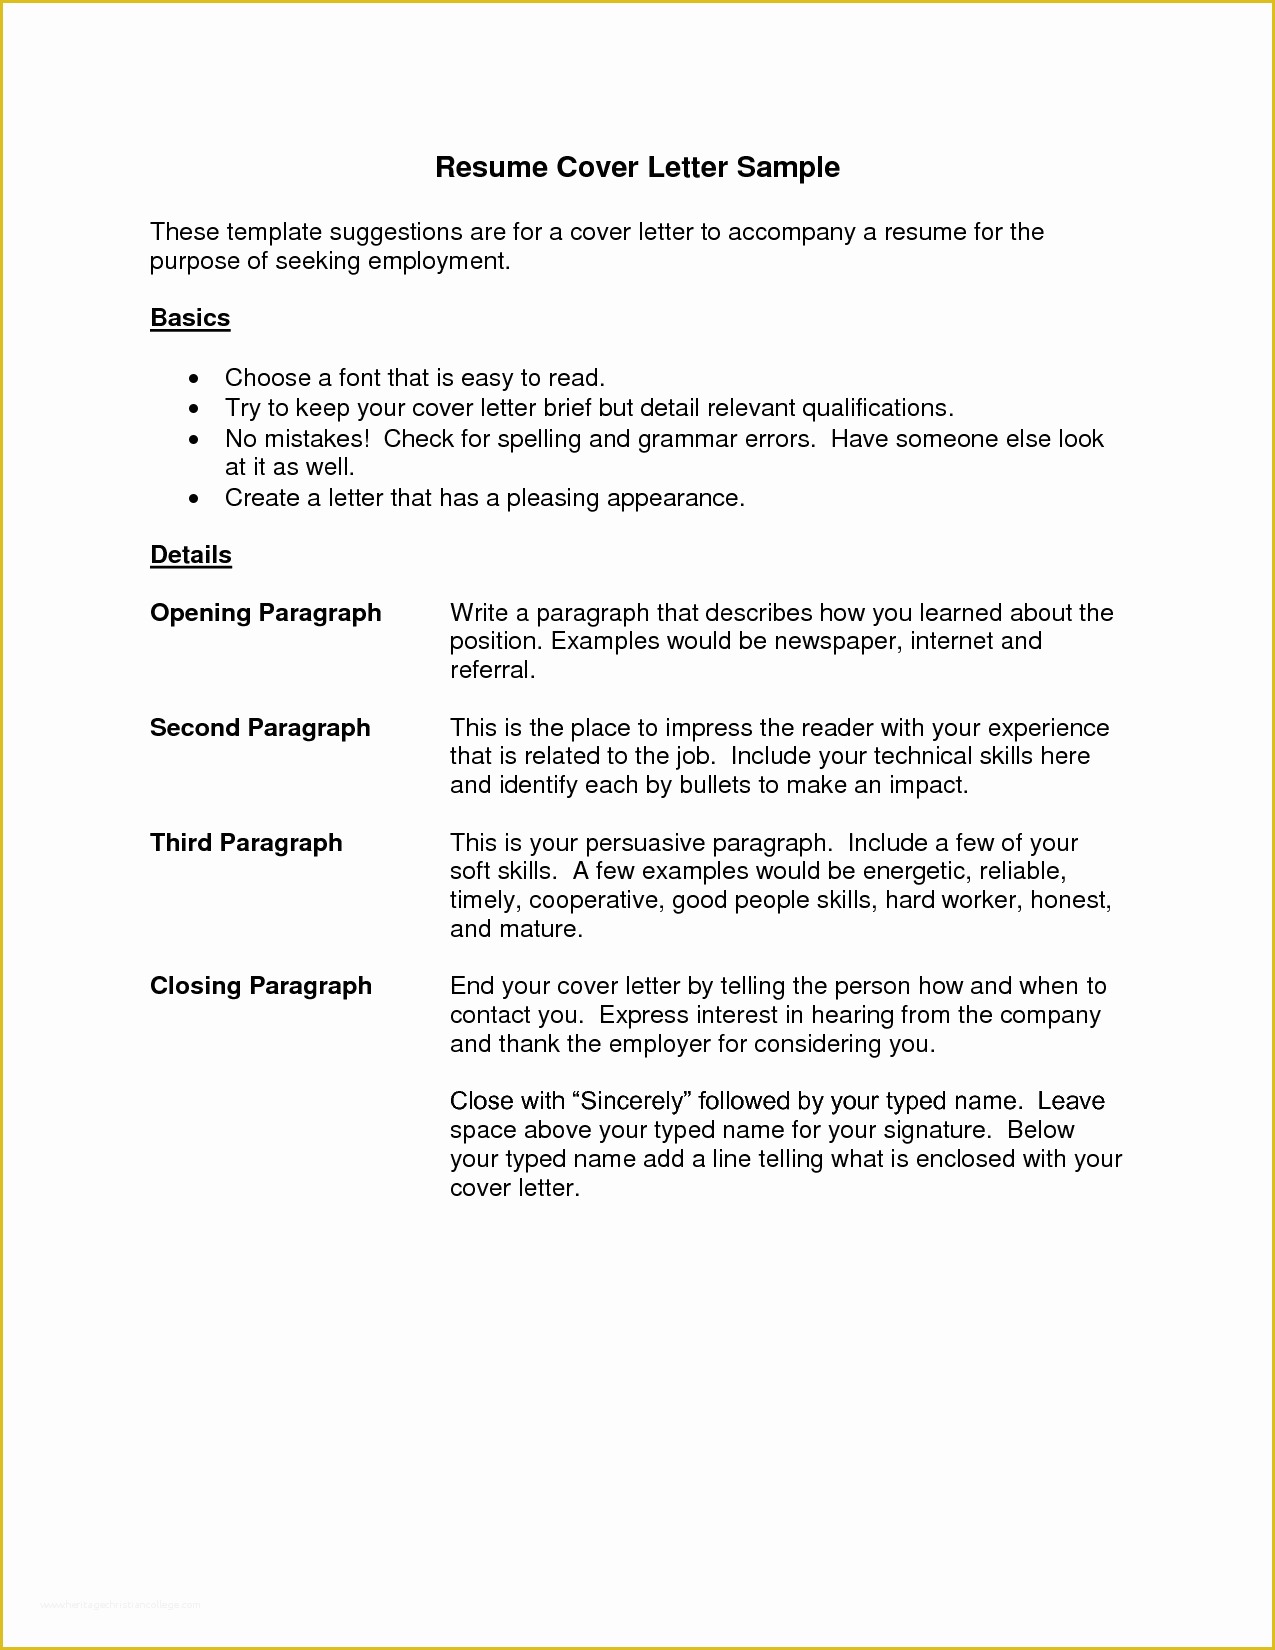 Free Cover Letter Template Of Cover Letter Resume Best Templatesimple Cover Letter